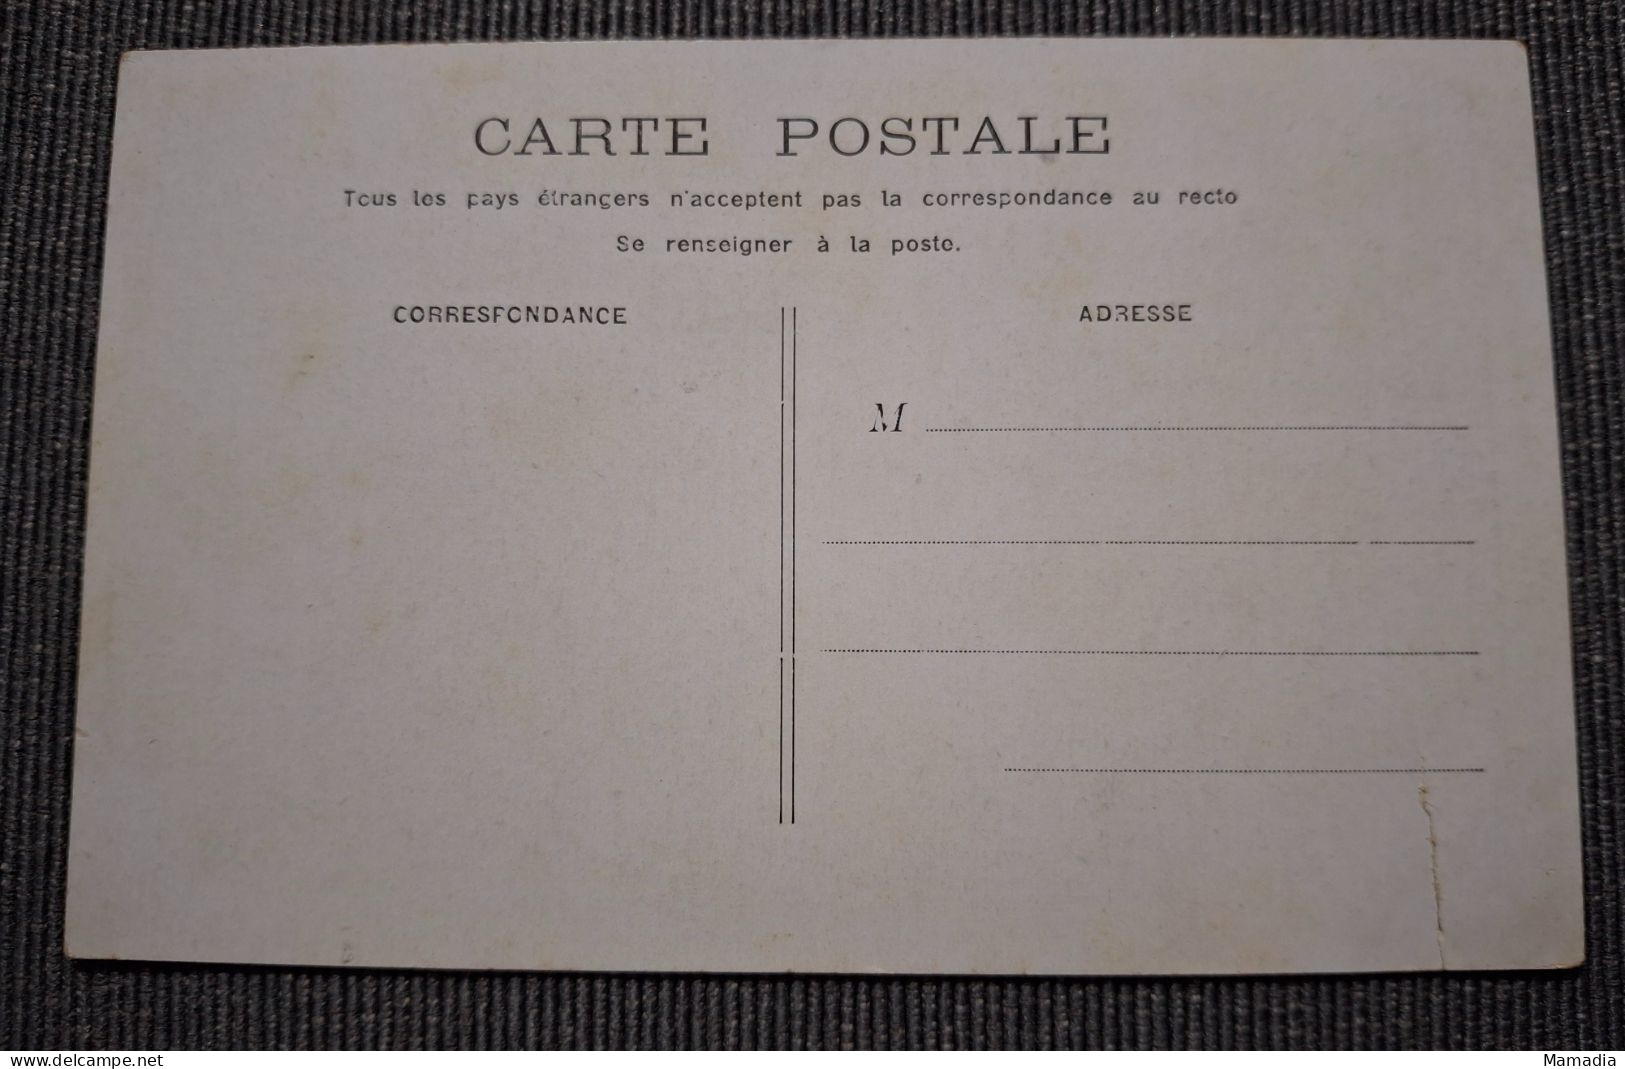 CARTE POSTALE ANCIENNE CYCLE VELO SERIE "MADEMOISELLE ECOUTEZ-MOI DONC" N°1 / 6 - Coppie